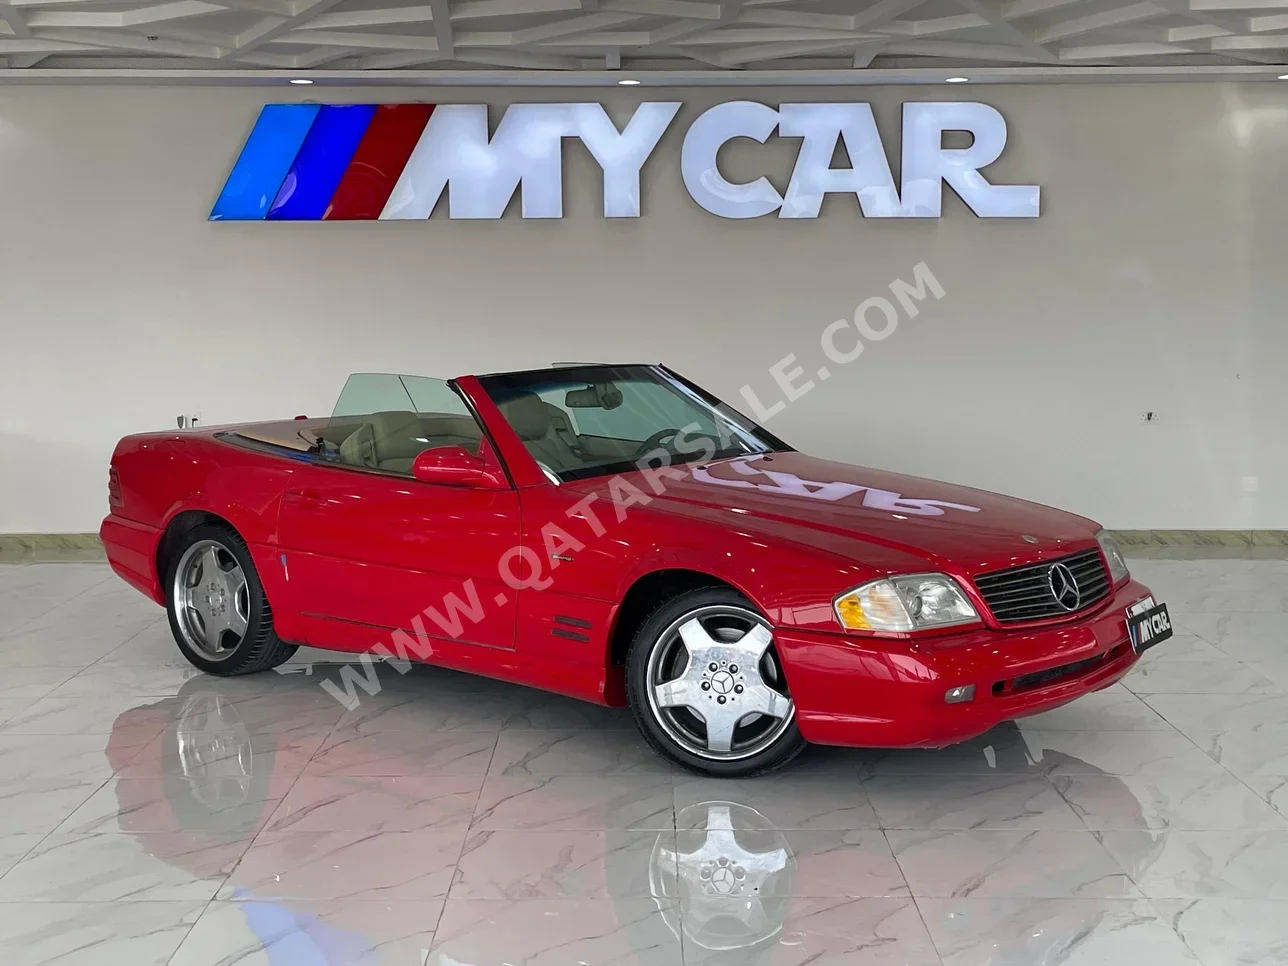 Mercedes-Benz  SL  500  2002  Automatic  186,000 Km  8 Cylinder  Rear Wheel Drive (RWD)  Coupe / Sport  Red